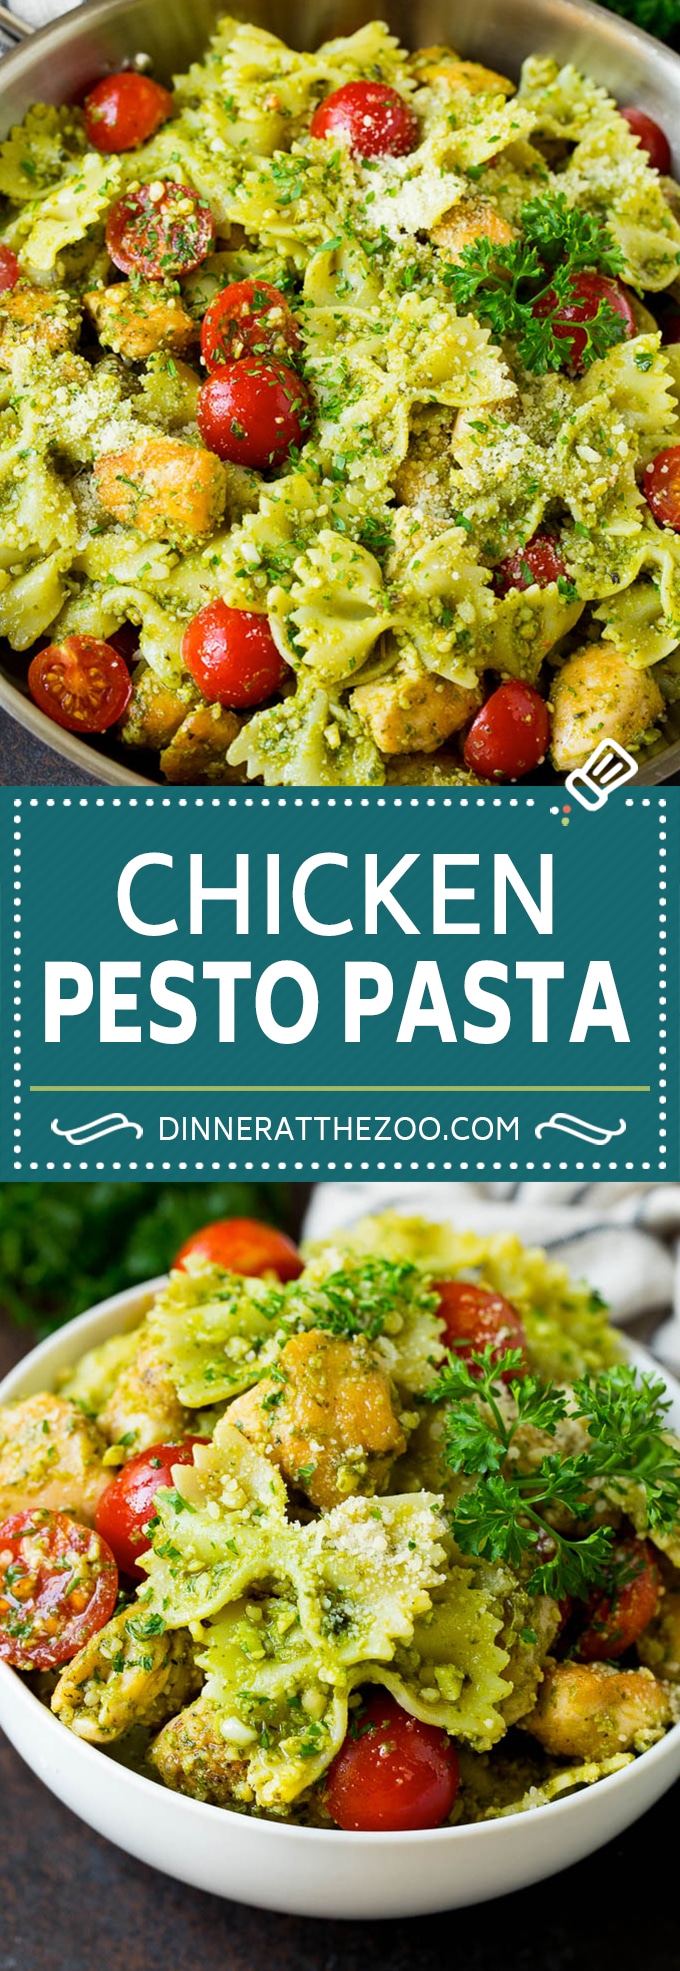 This chicken pesto pasta is sauteed chicken, farfalle pasta and cherry tomatoes, all tossed in basil pesto and finished off with parmesan cheese.